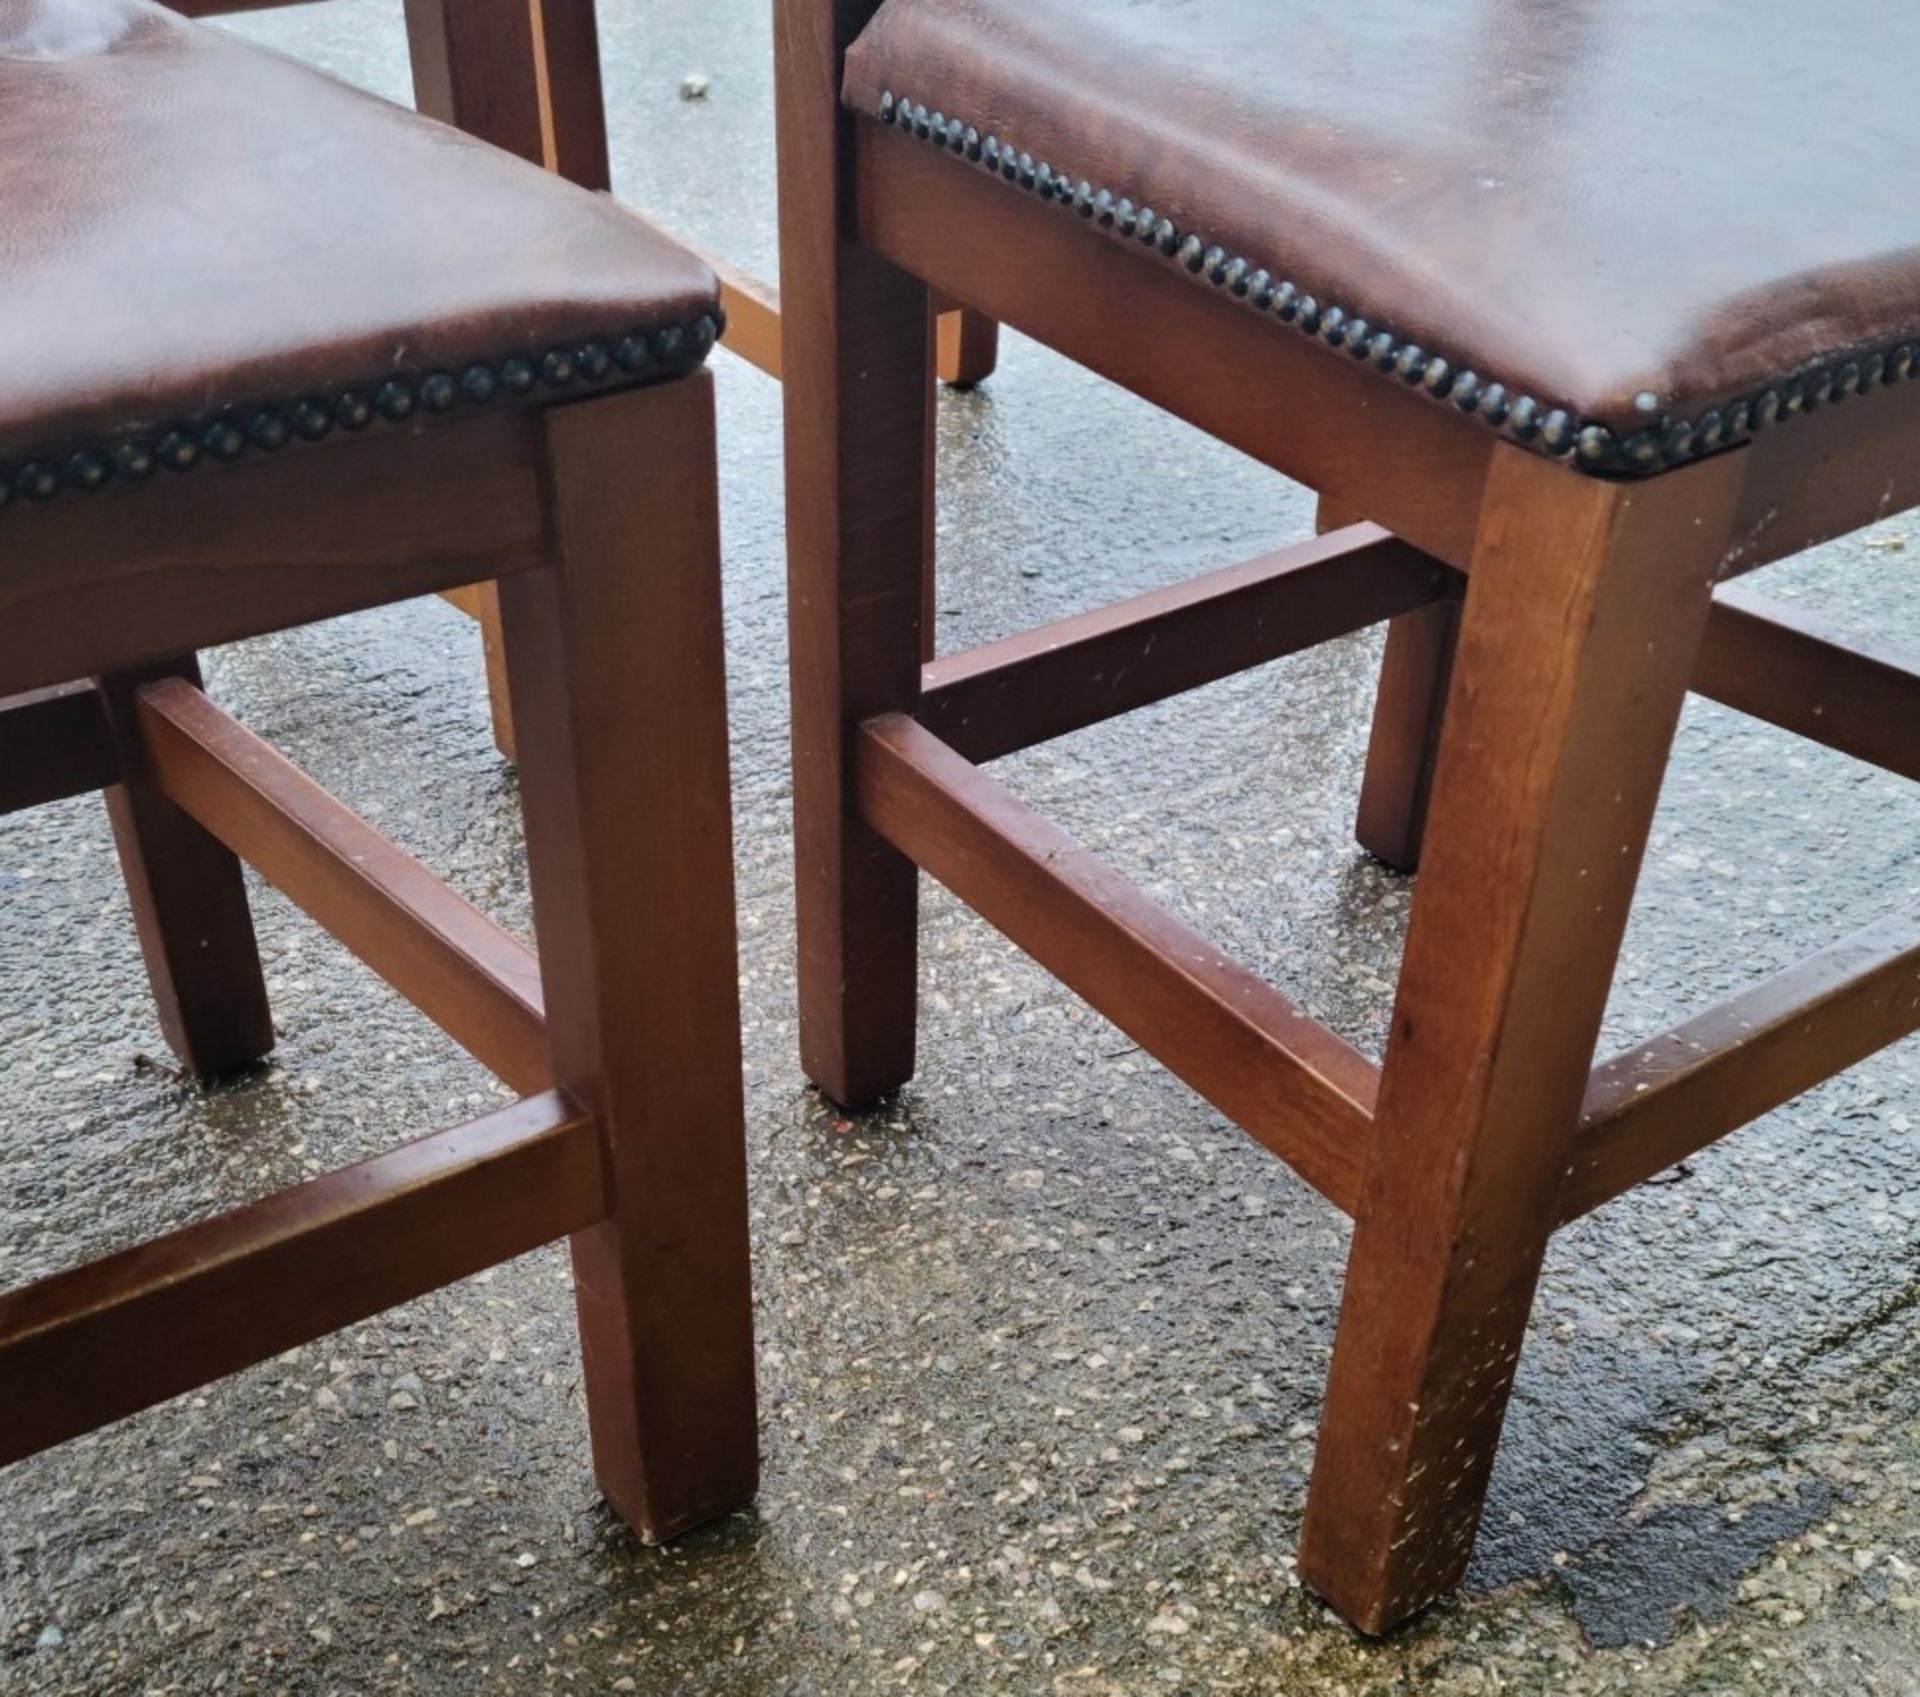 Set Of 5 x Aztec Print Dining Chairs With Faux Brown Leather Seating & Studded Seams - Image 4 of 5